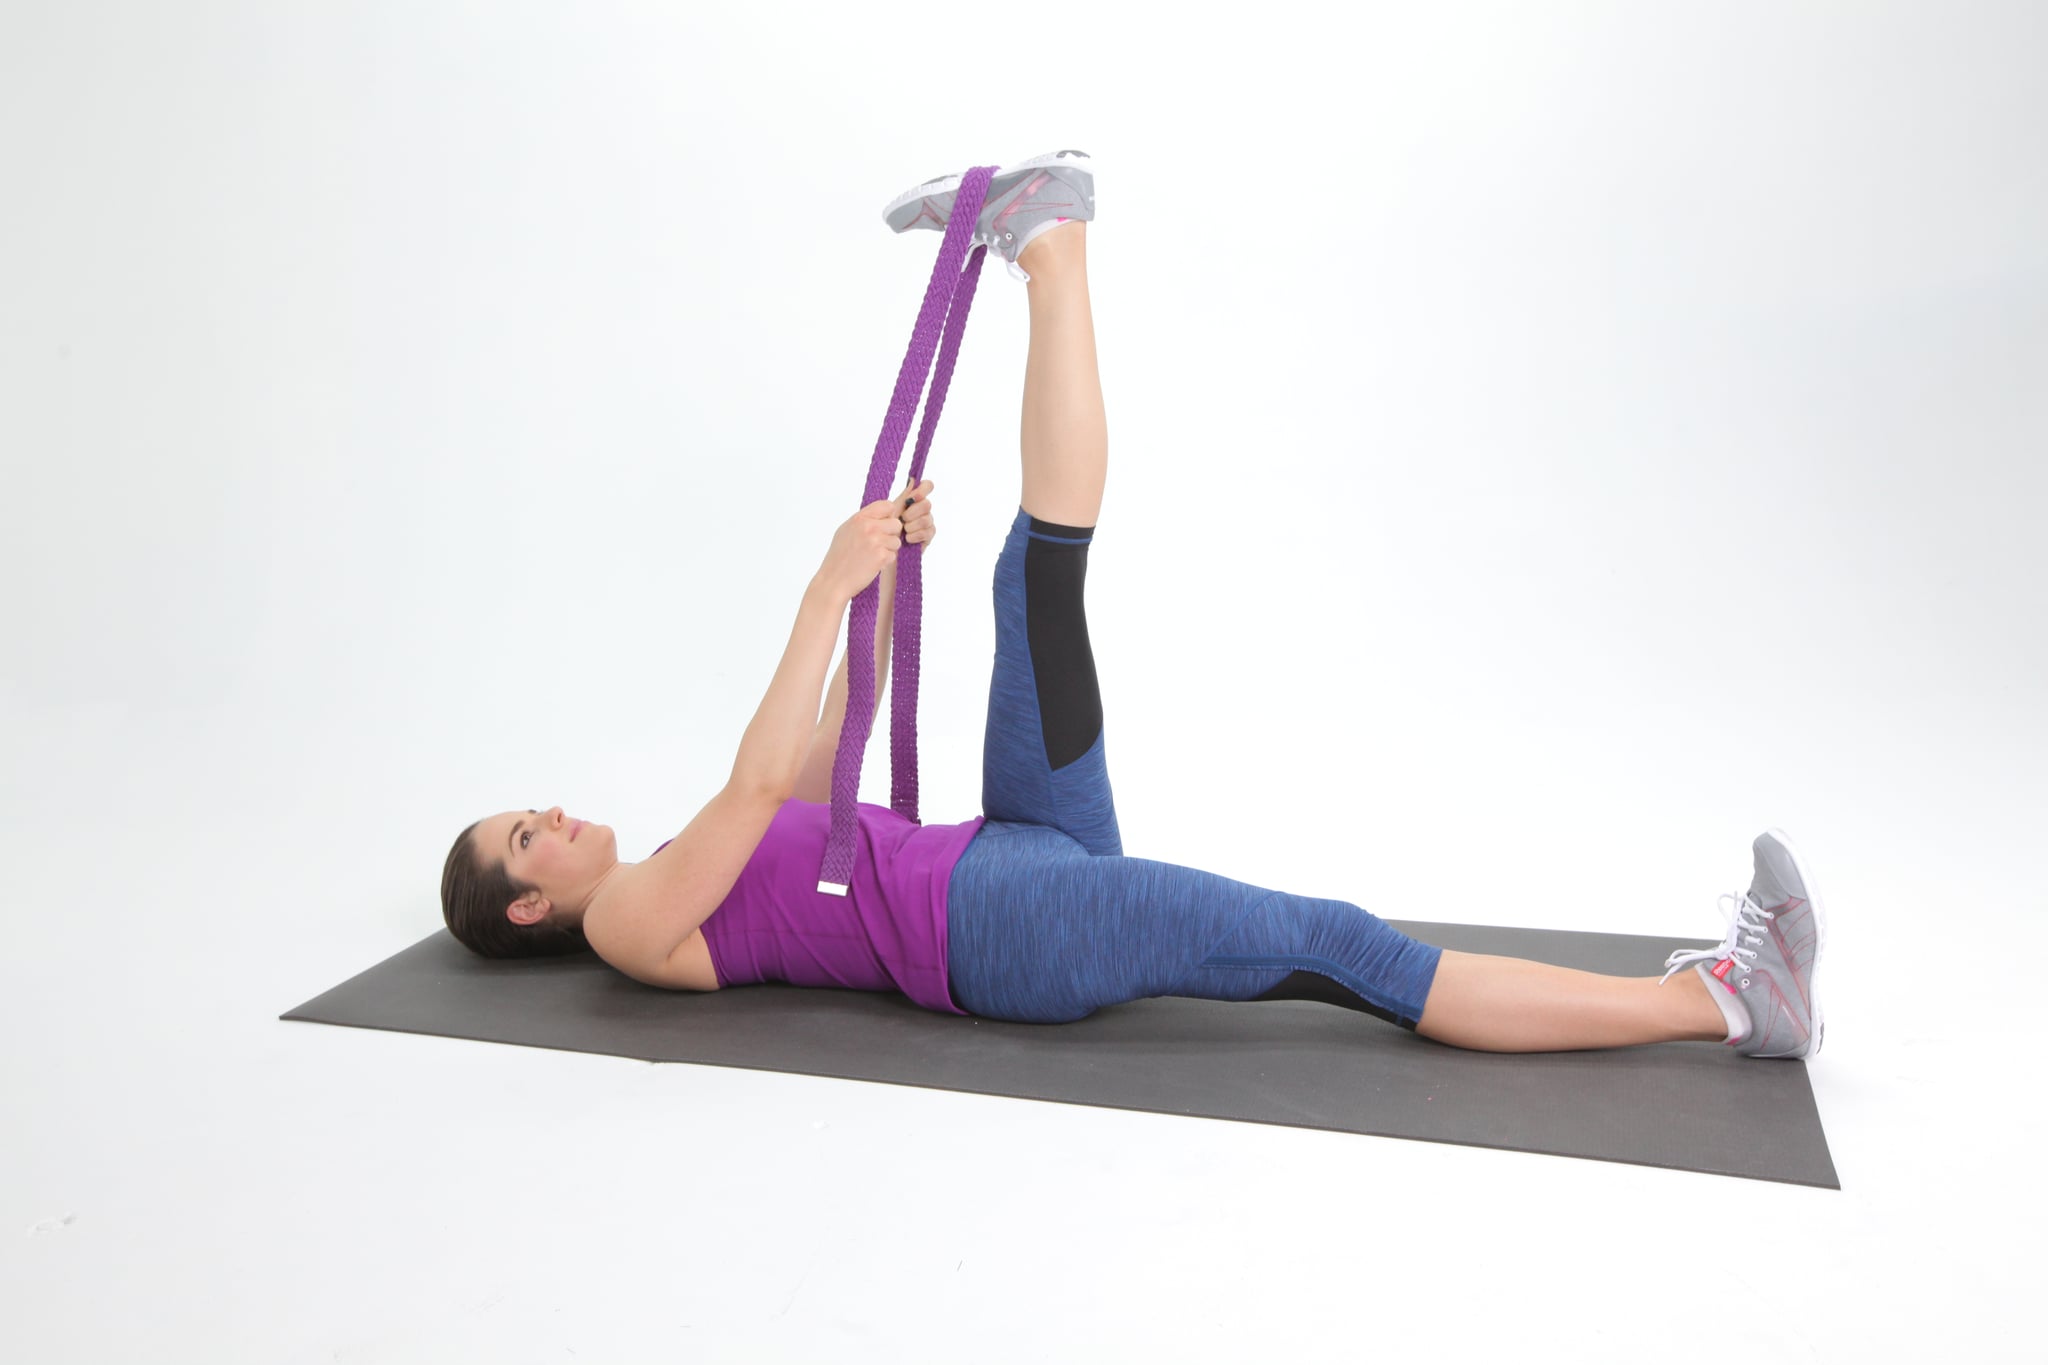 Supine Stretch With Resistance Band, 3 Stretches You Should Always Do  After a Run to Help Ease IT Band Pain